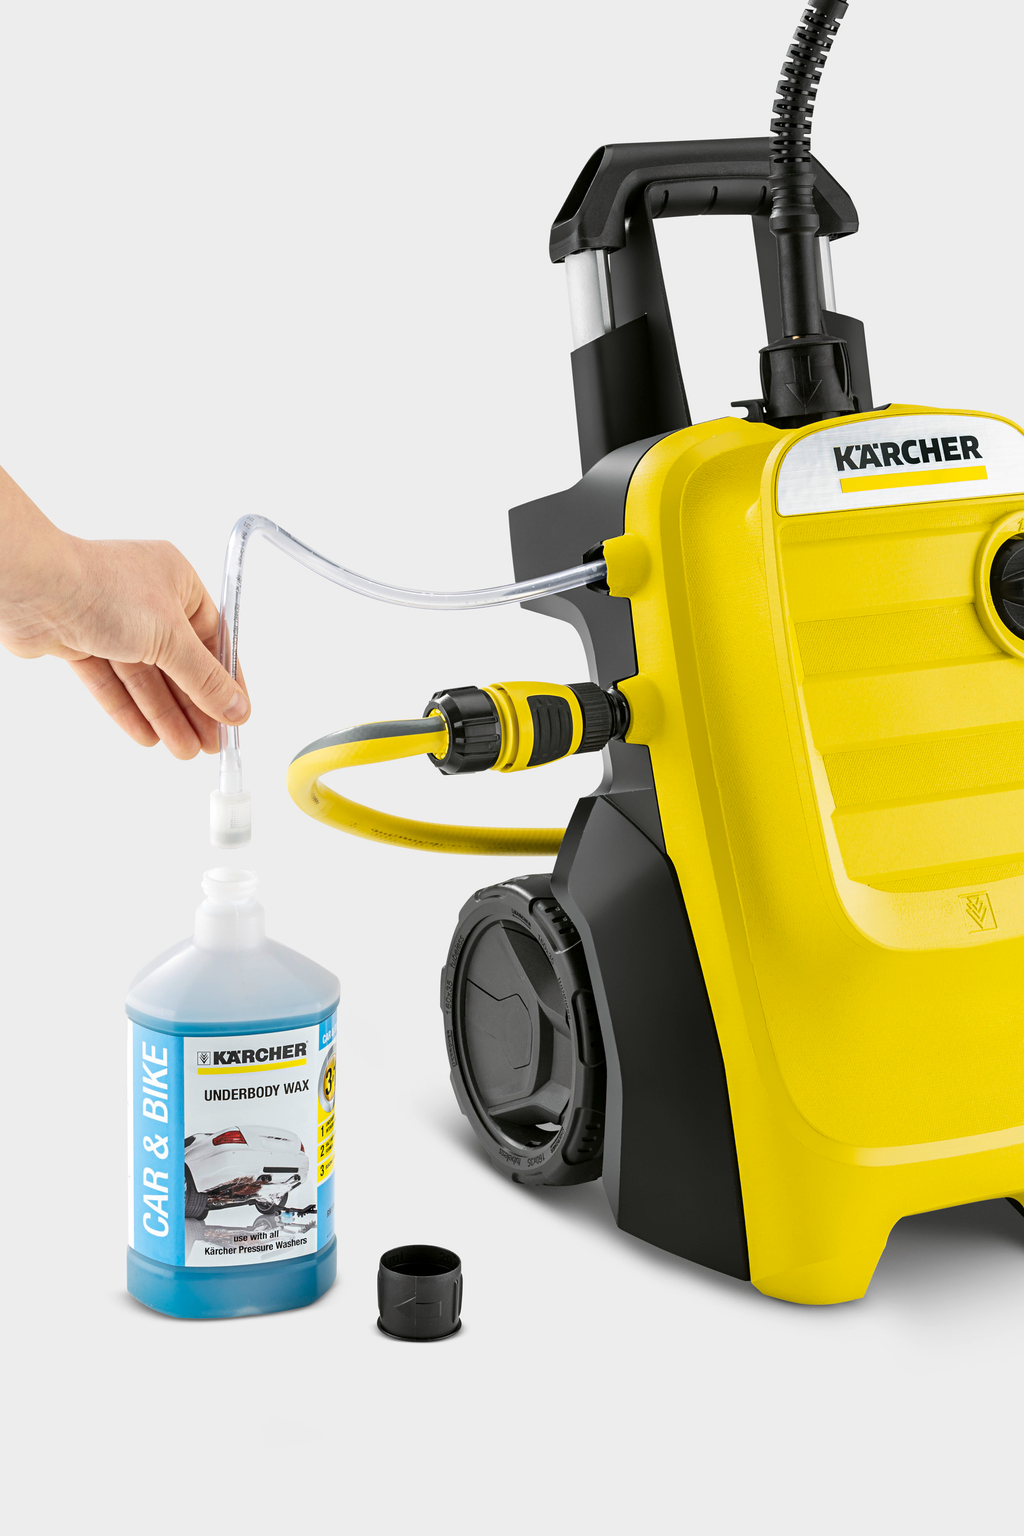 Optionally, you can add a cleaning agent - the K 4 Compact is ready